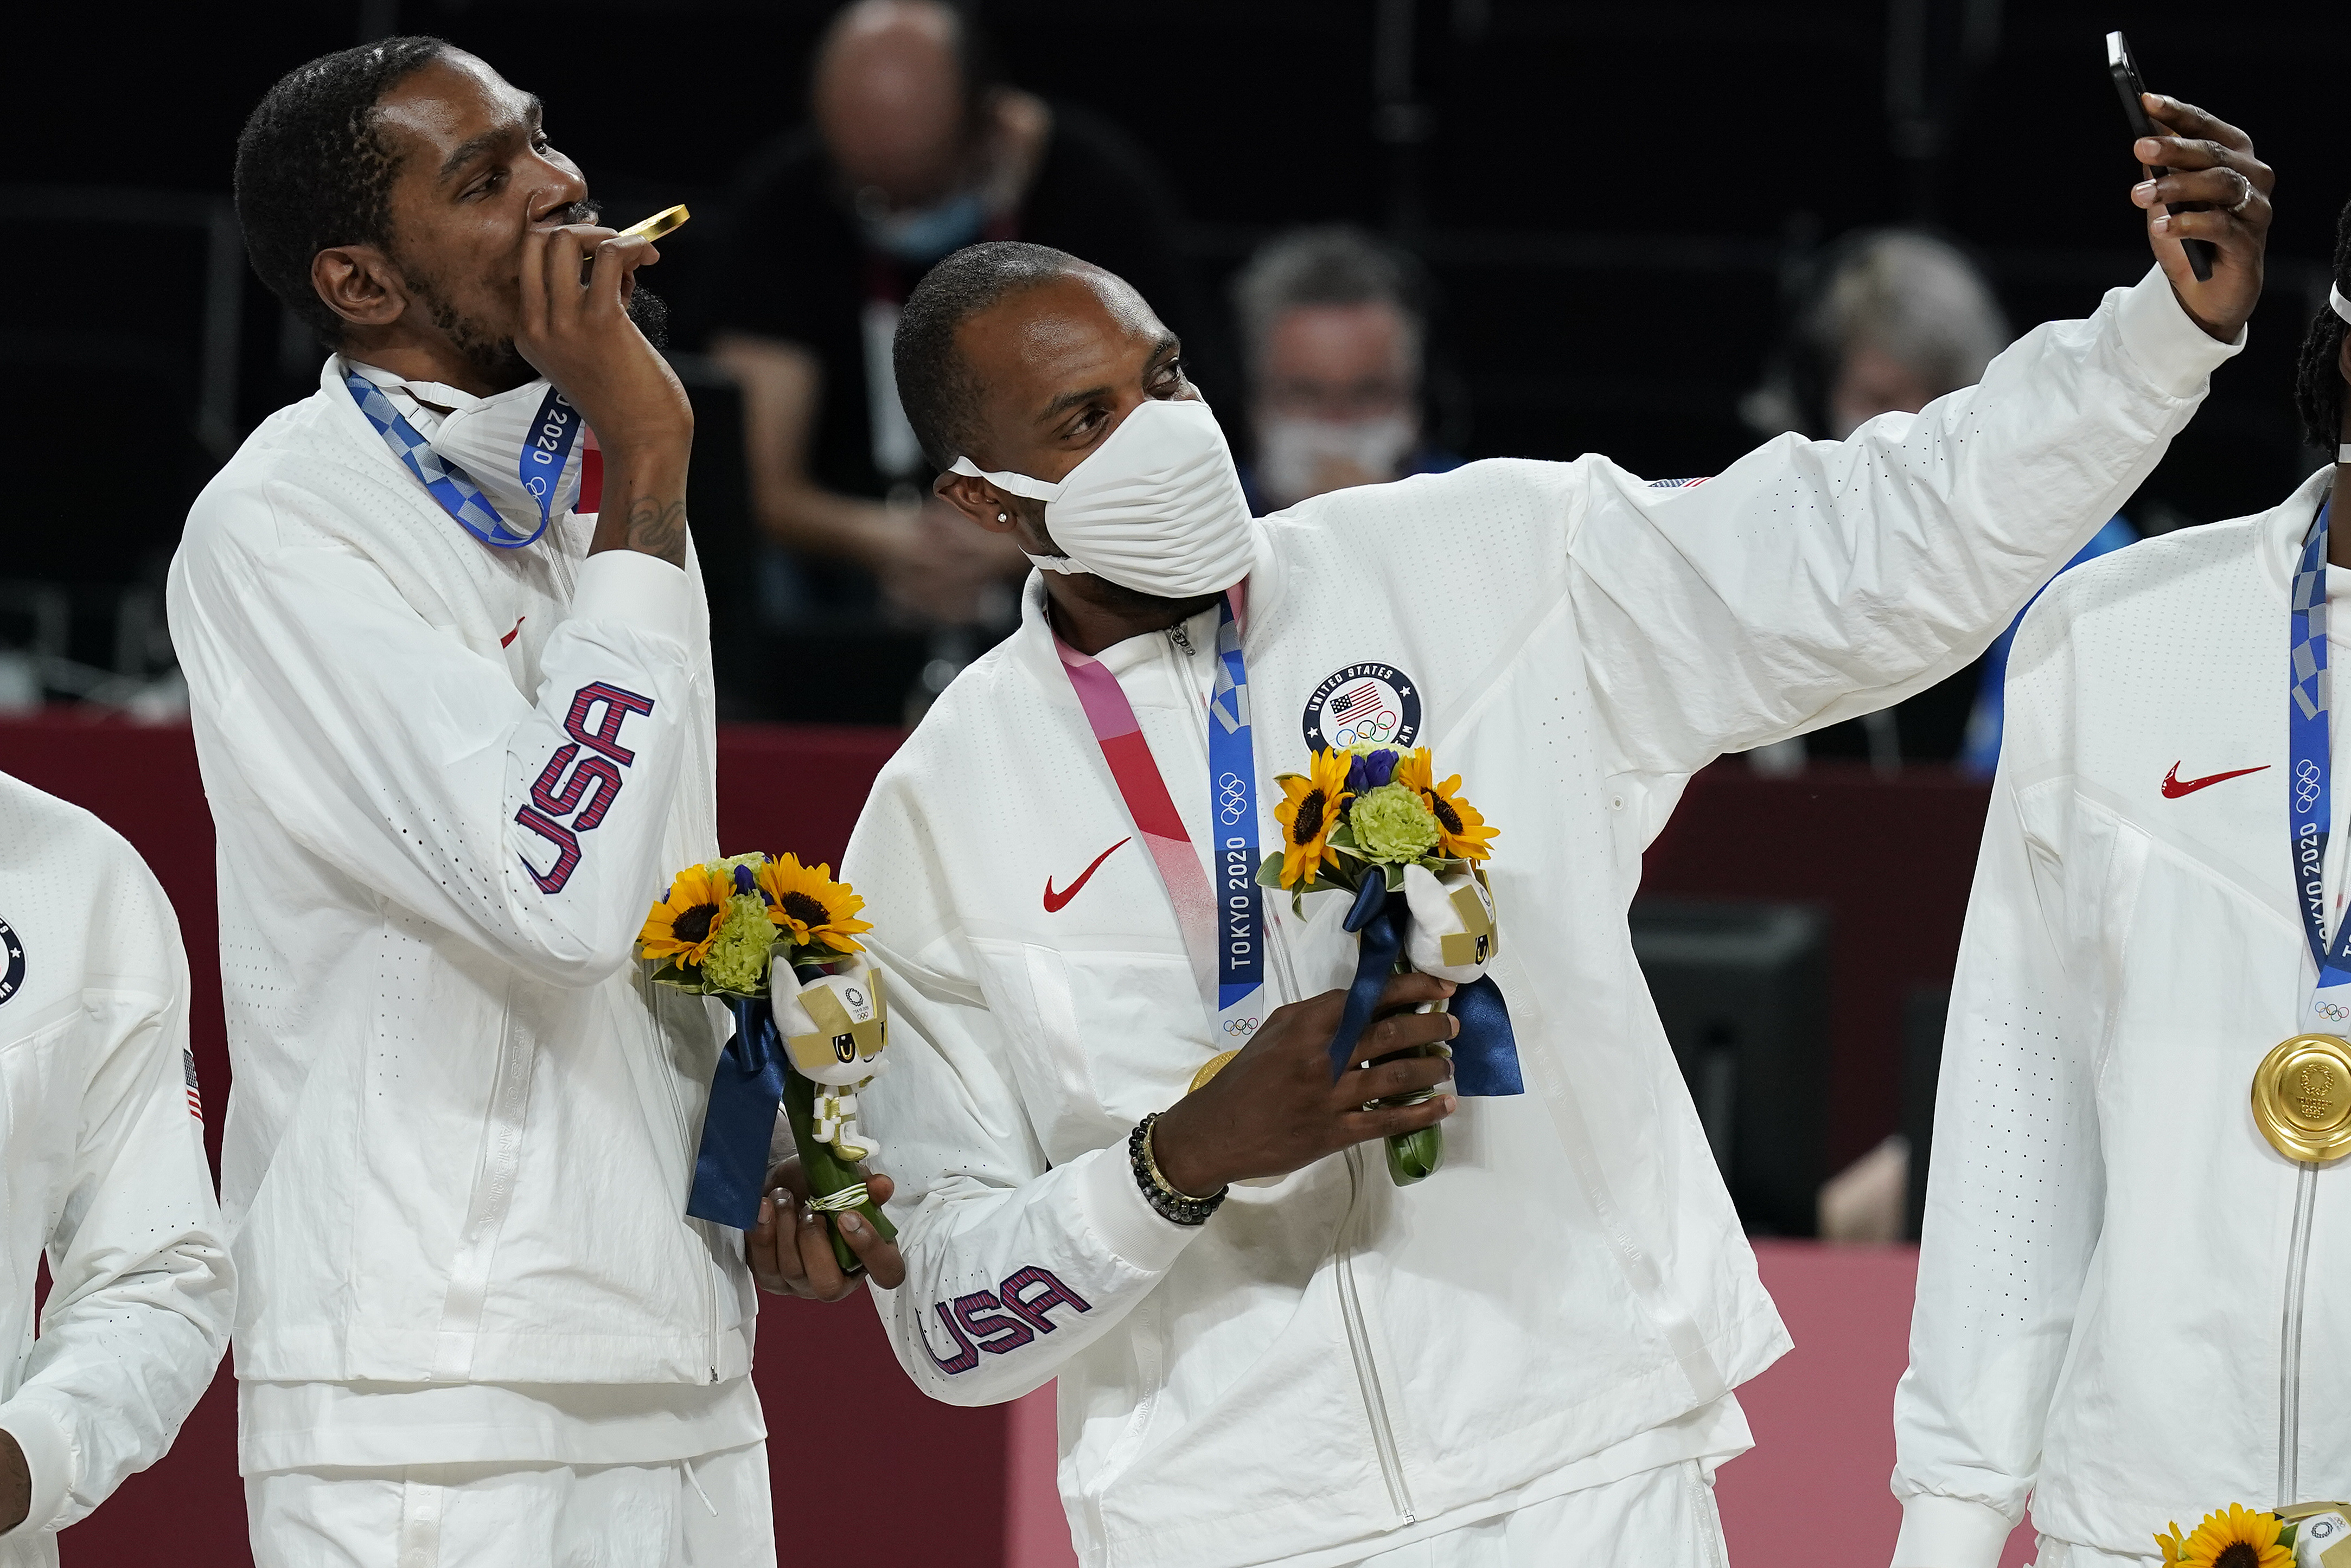 U.S. men's basketball team loses Olympic opener to France - The